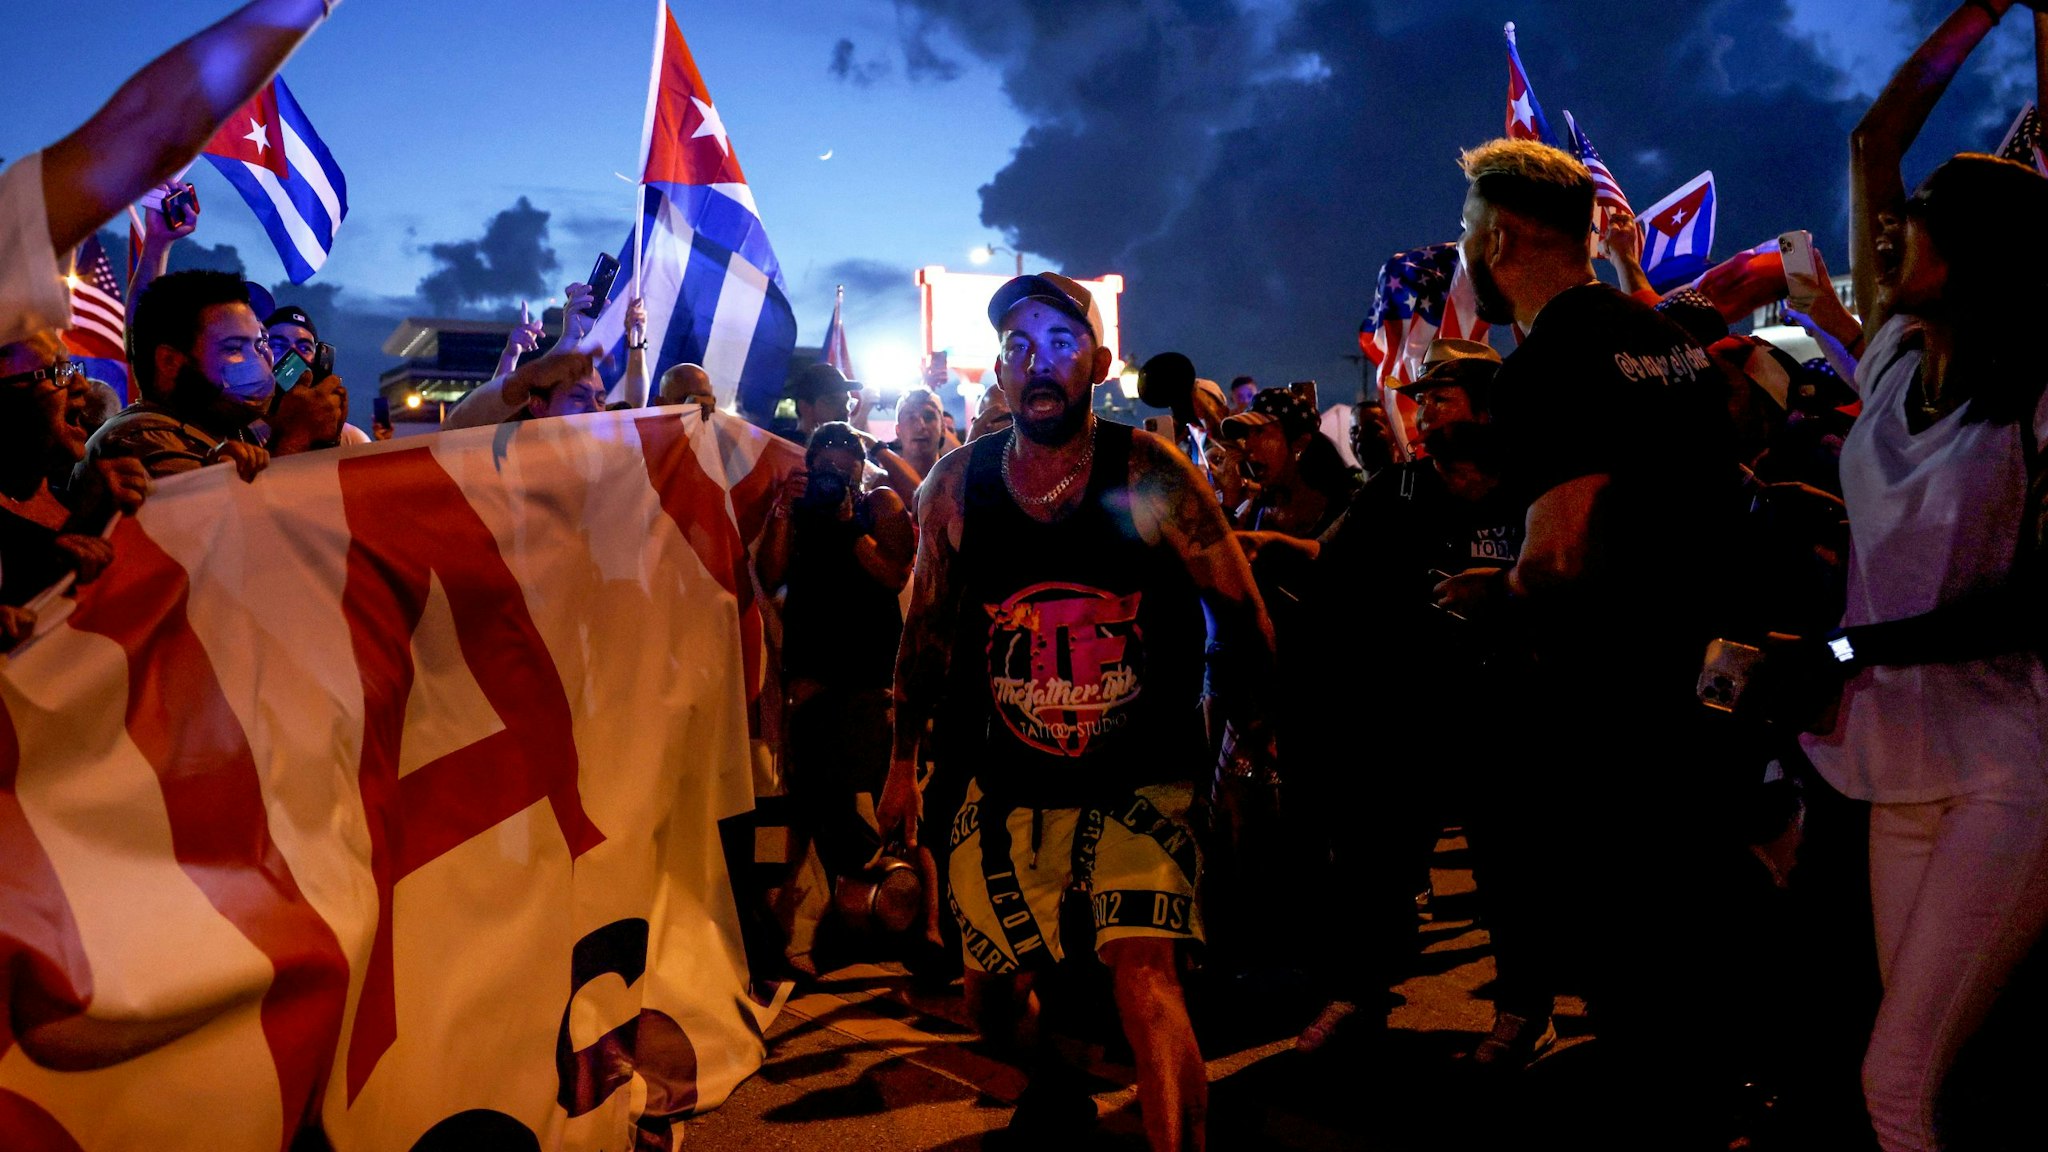 MIAMI, FLORIDA - JULY 11: People rally near Versailles, a Cuban restaurant in the Little Havana neighborhood, in support of the protests in Cuba on July 11, 2021 in Miami, Florida. Thousands took to the streets across Cuba to protest pandemic restrictions, the pace of Covid-19 vaccinations and the Cuban government.